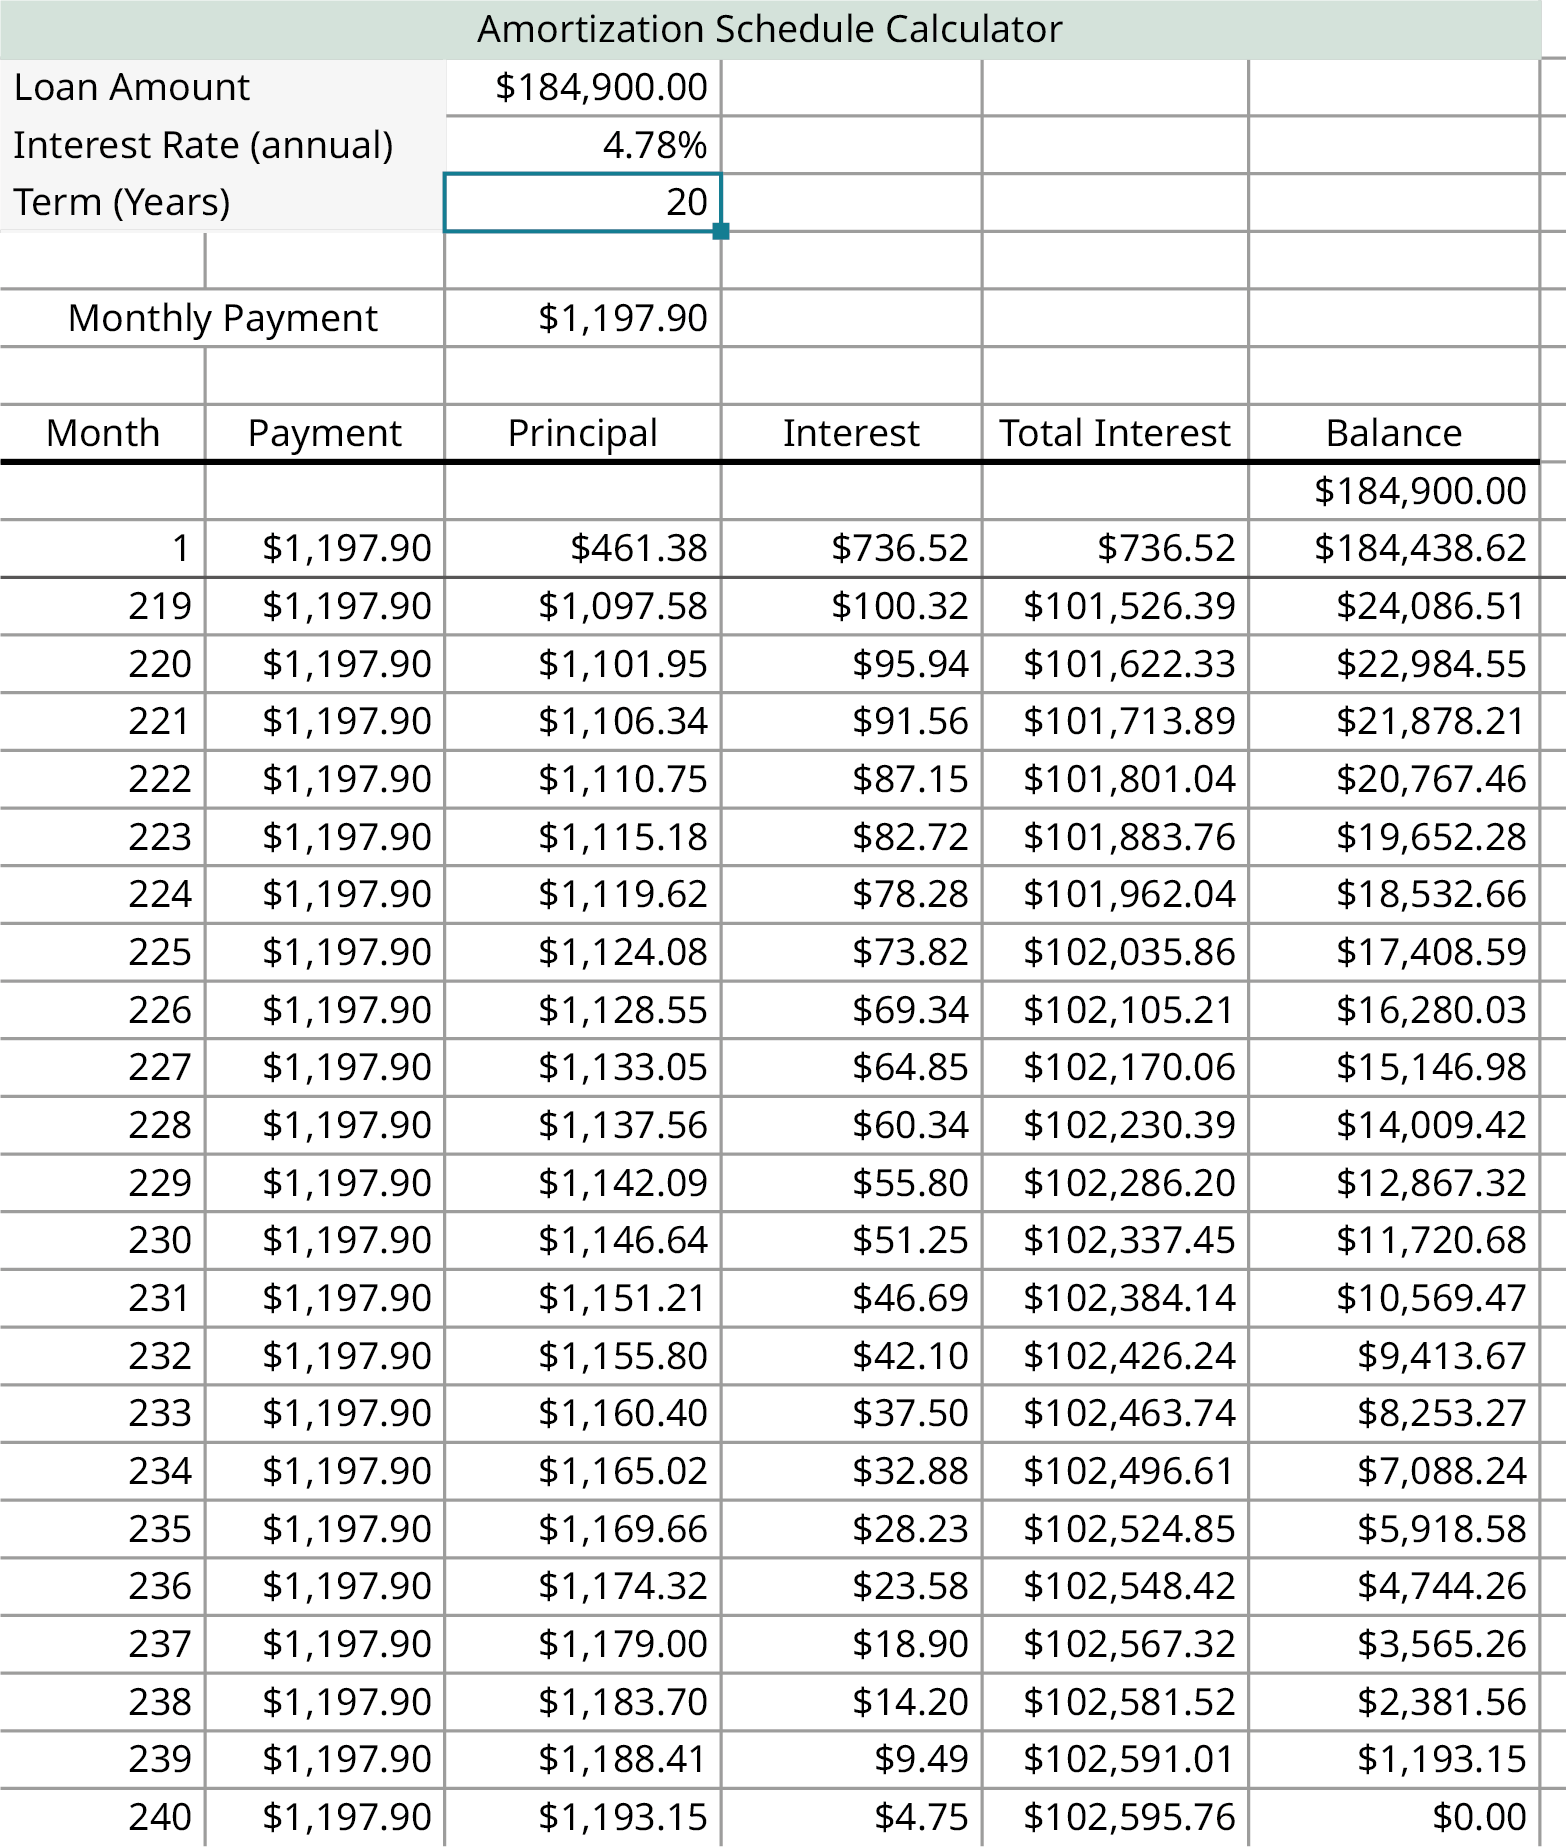 A spreadsheet labeled as amortization schedule calculator. The sheet calculates the repayment for the loan amount of $184,900.00 for an interest rate of 4.78 percent annually and the monthly payment is $1197.90 over 20 years. The factors include calculations such as month, payment, principal, interest, total, and interest and balance.